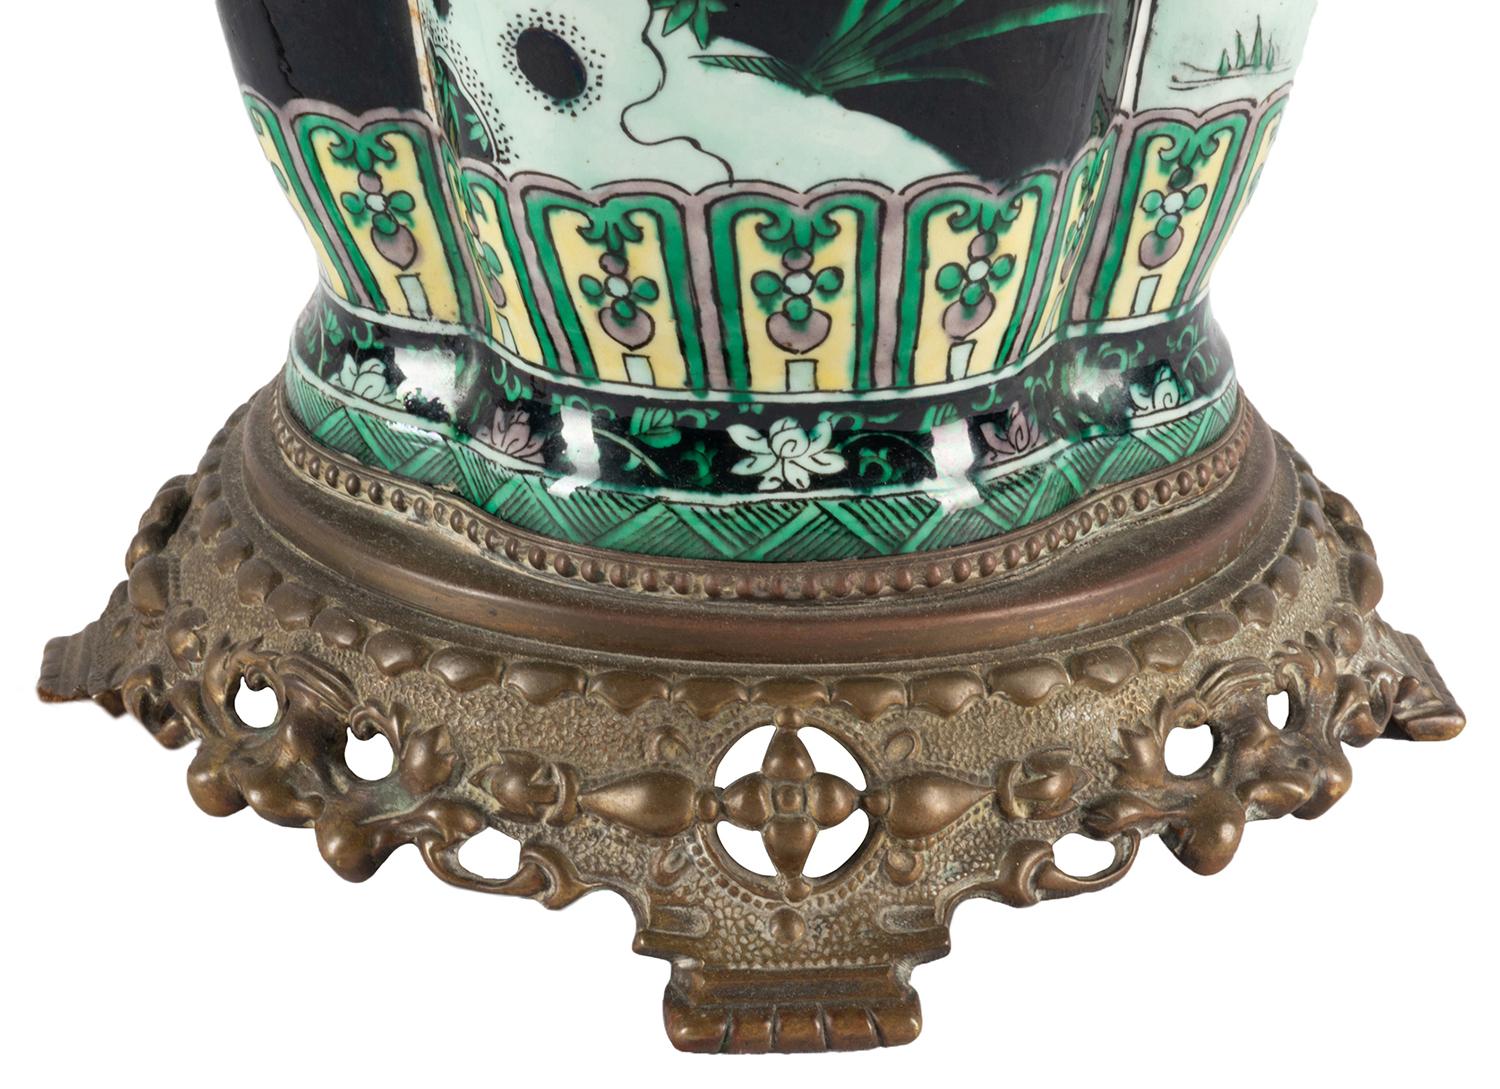 Chinese Export Chinese 19th Century Famille Noire Vase / Lamp For Sale